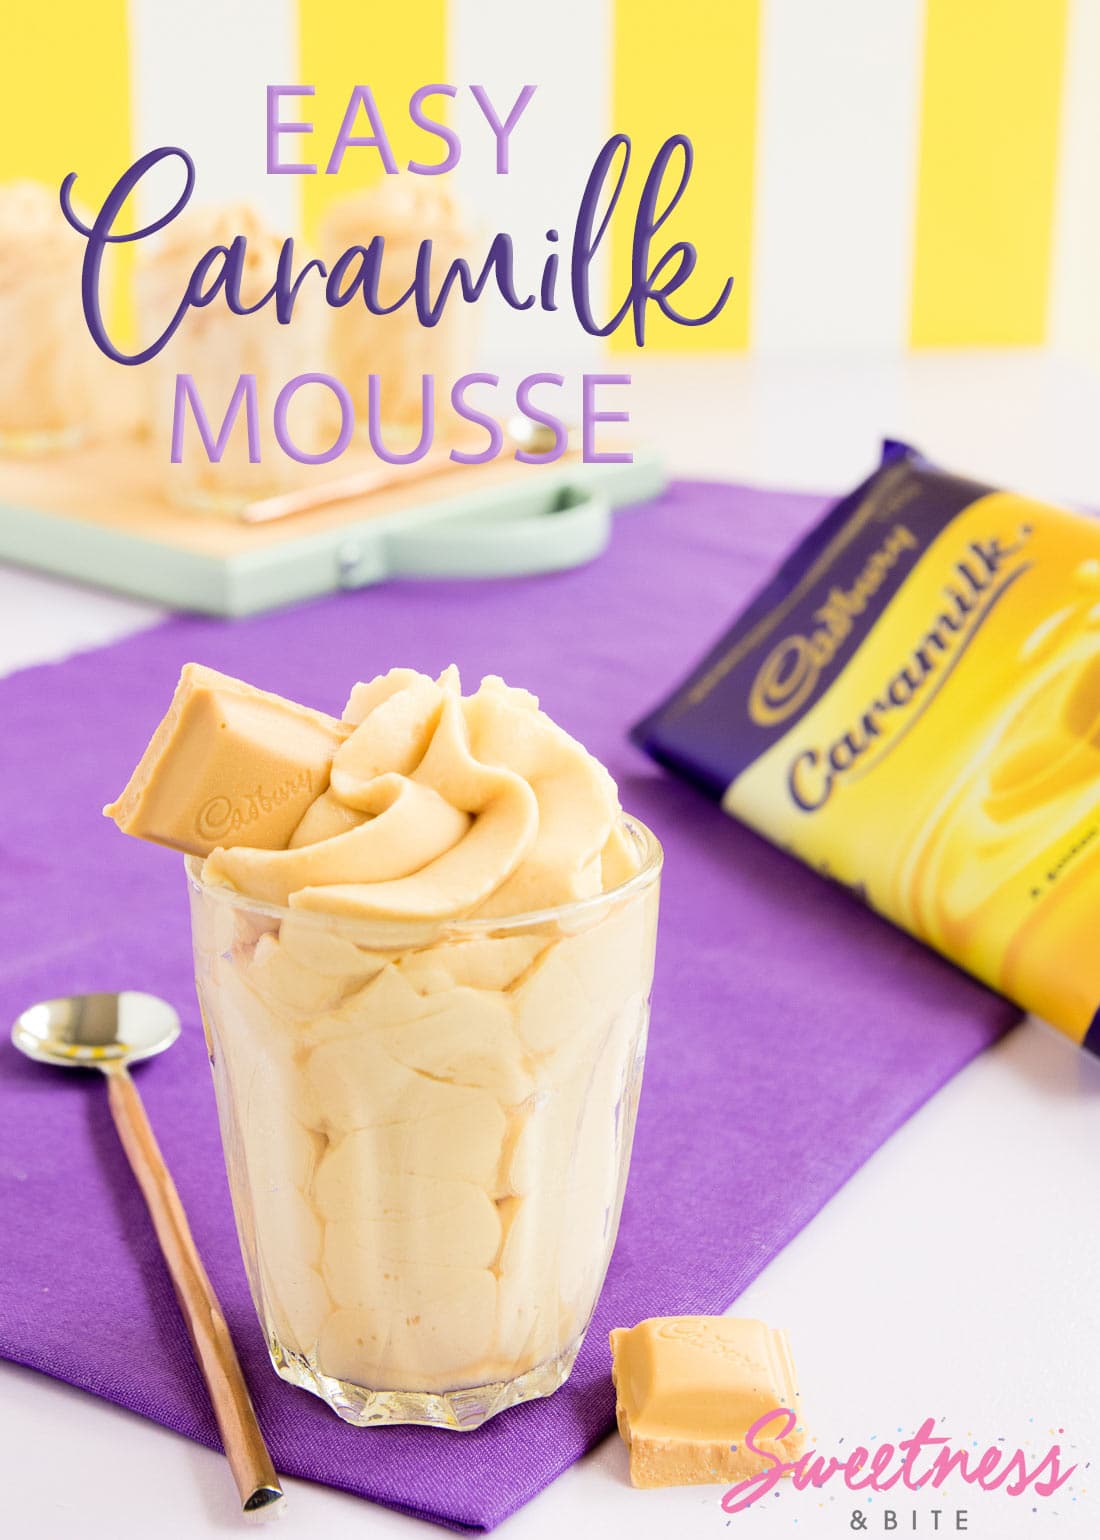 Mousse piped in a swirl into a small glass, with a block of Caramilk chocolate in the background. Text overlay reads: Easy Caramilk Mousse.